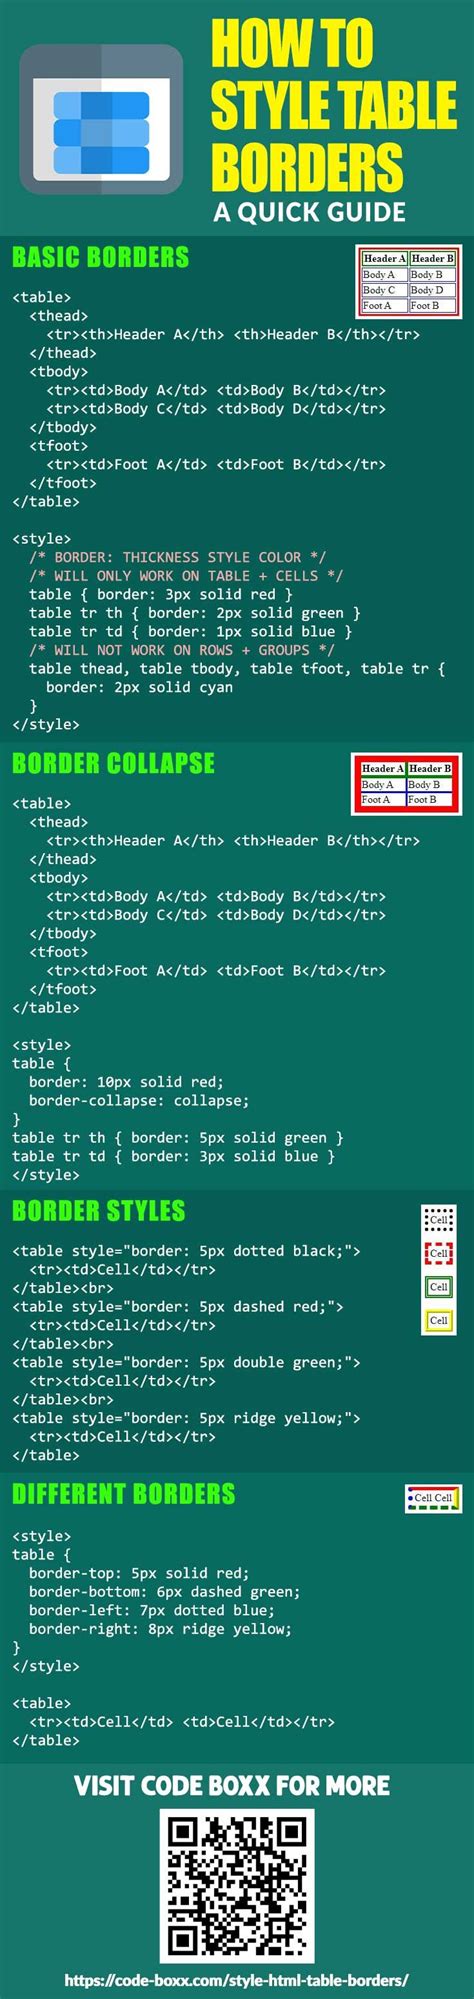 How To Style Table Borders In CSS HTML #tutorial #beginners | Web development programming ...